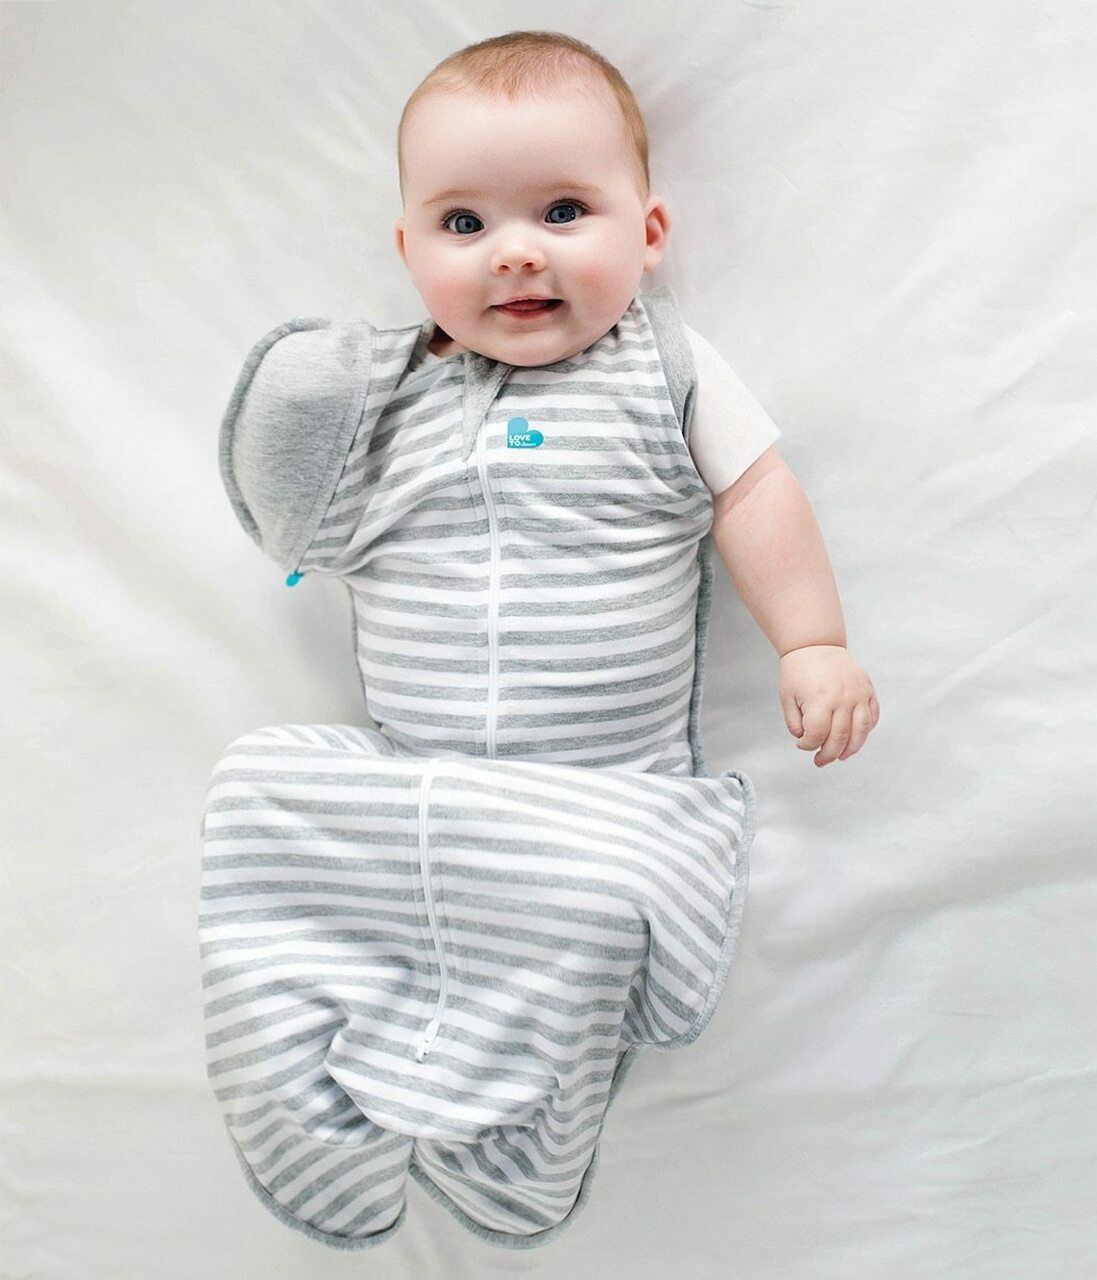 Love to Dream Original Swaddle Up Transition | Gray